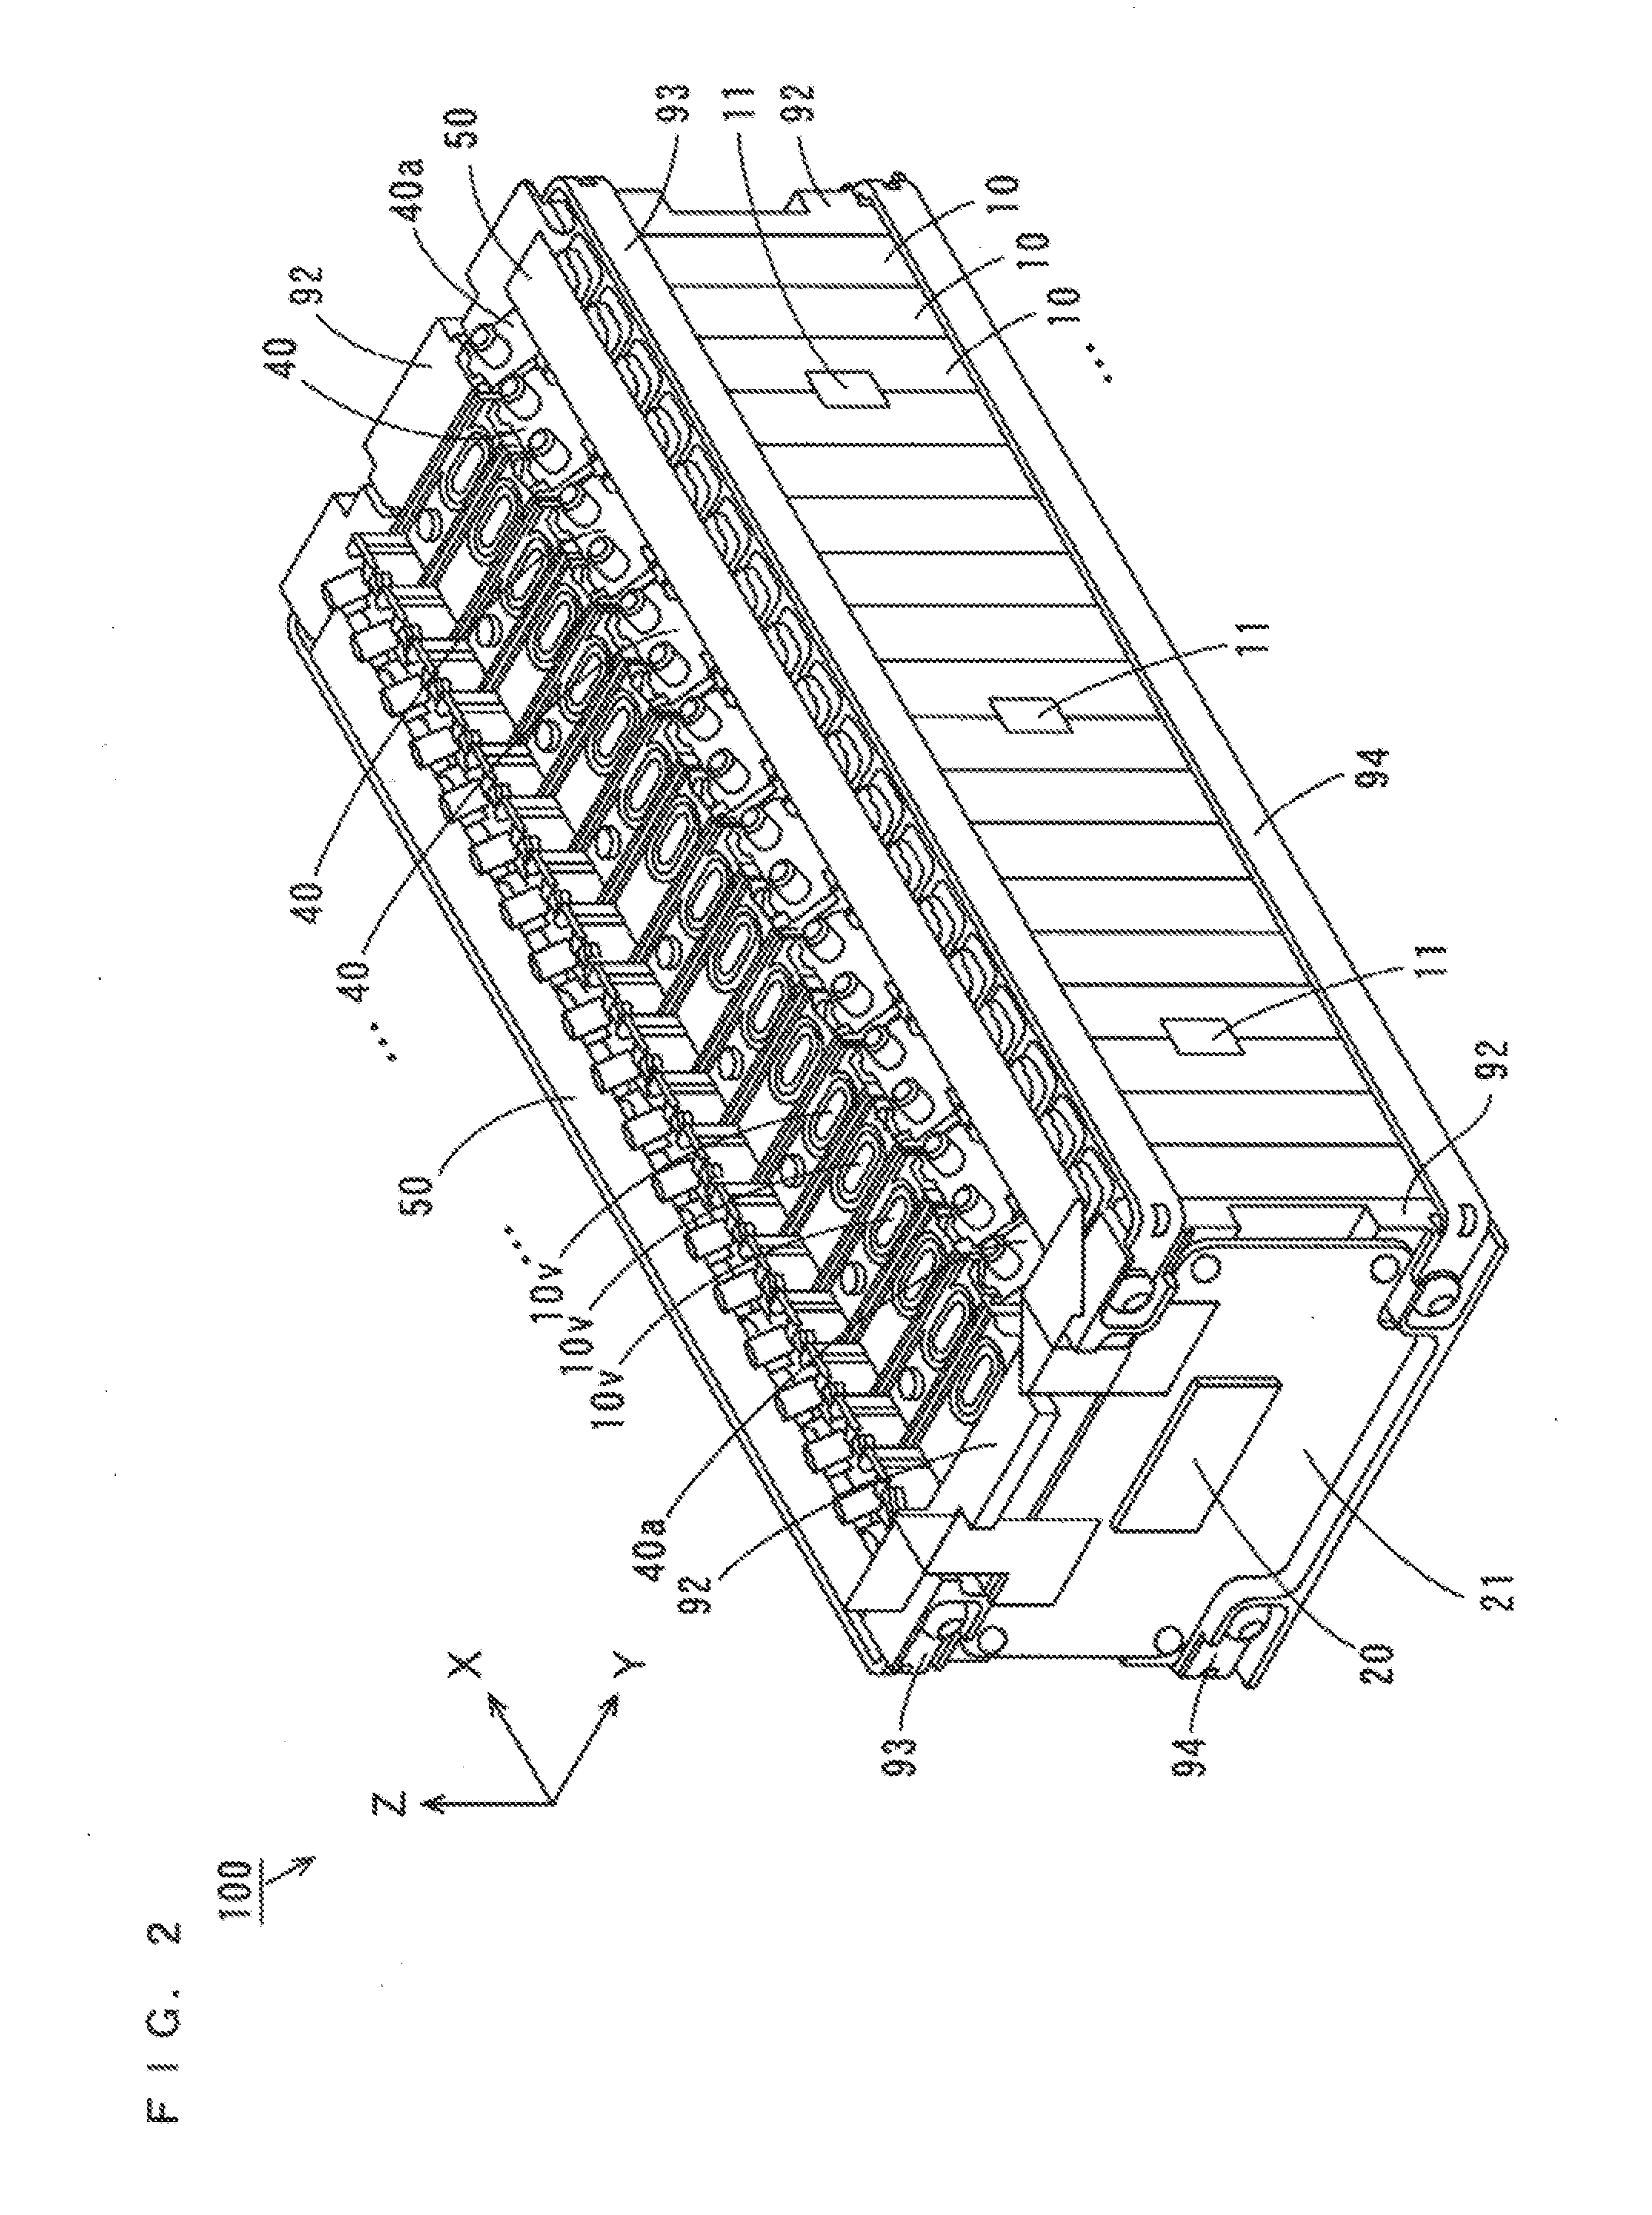 Battery module, battery system and electric vehicle